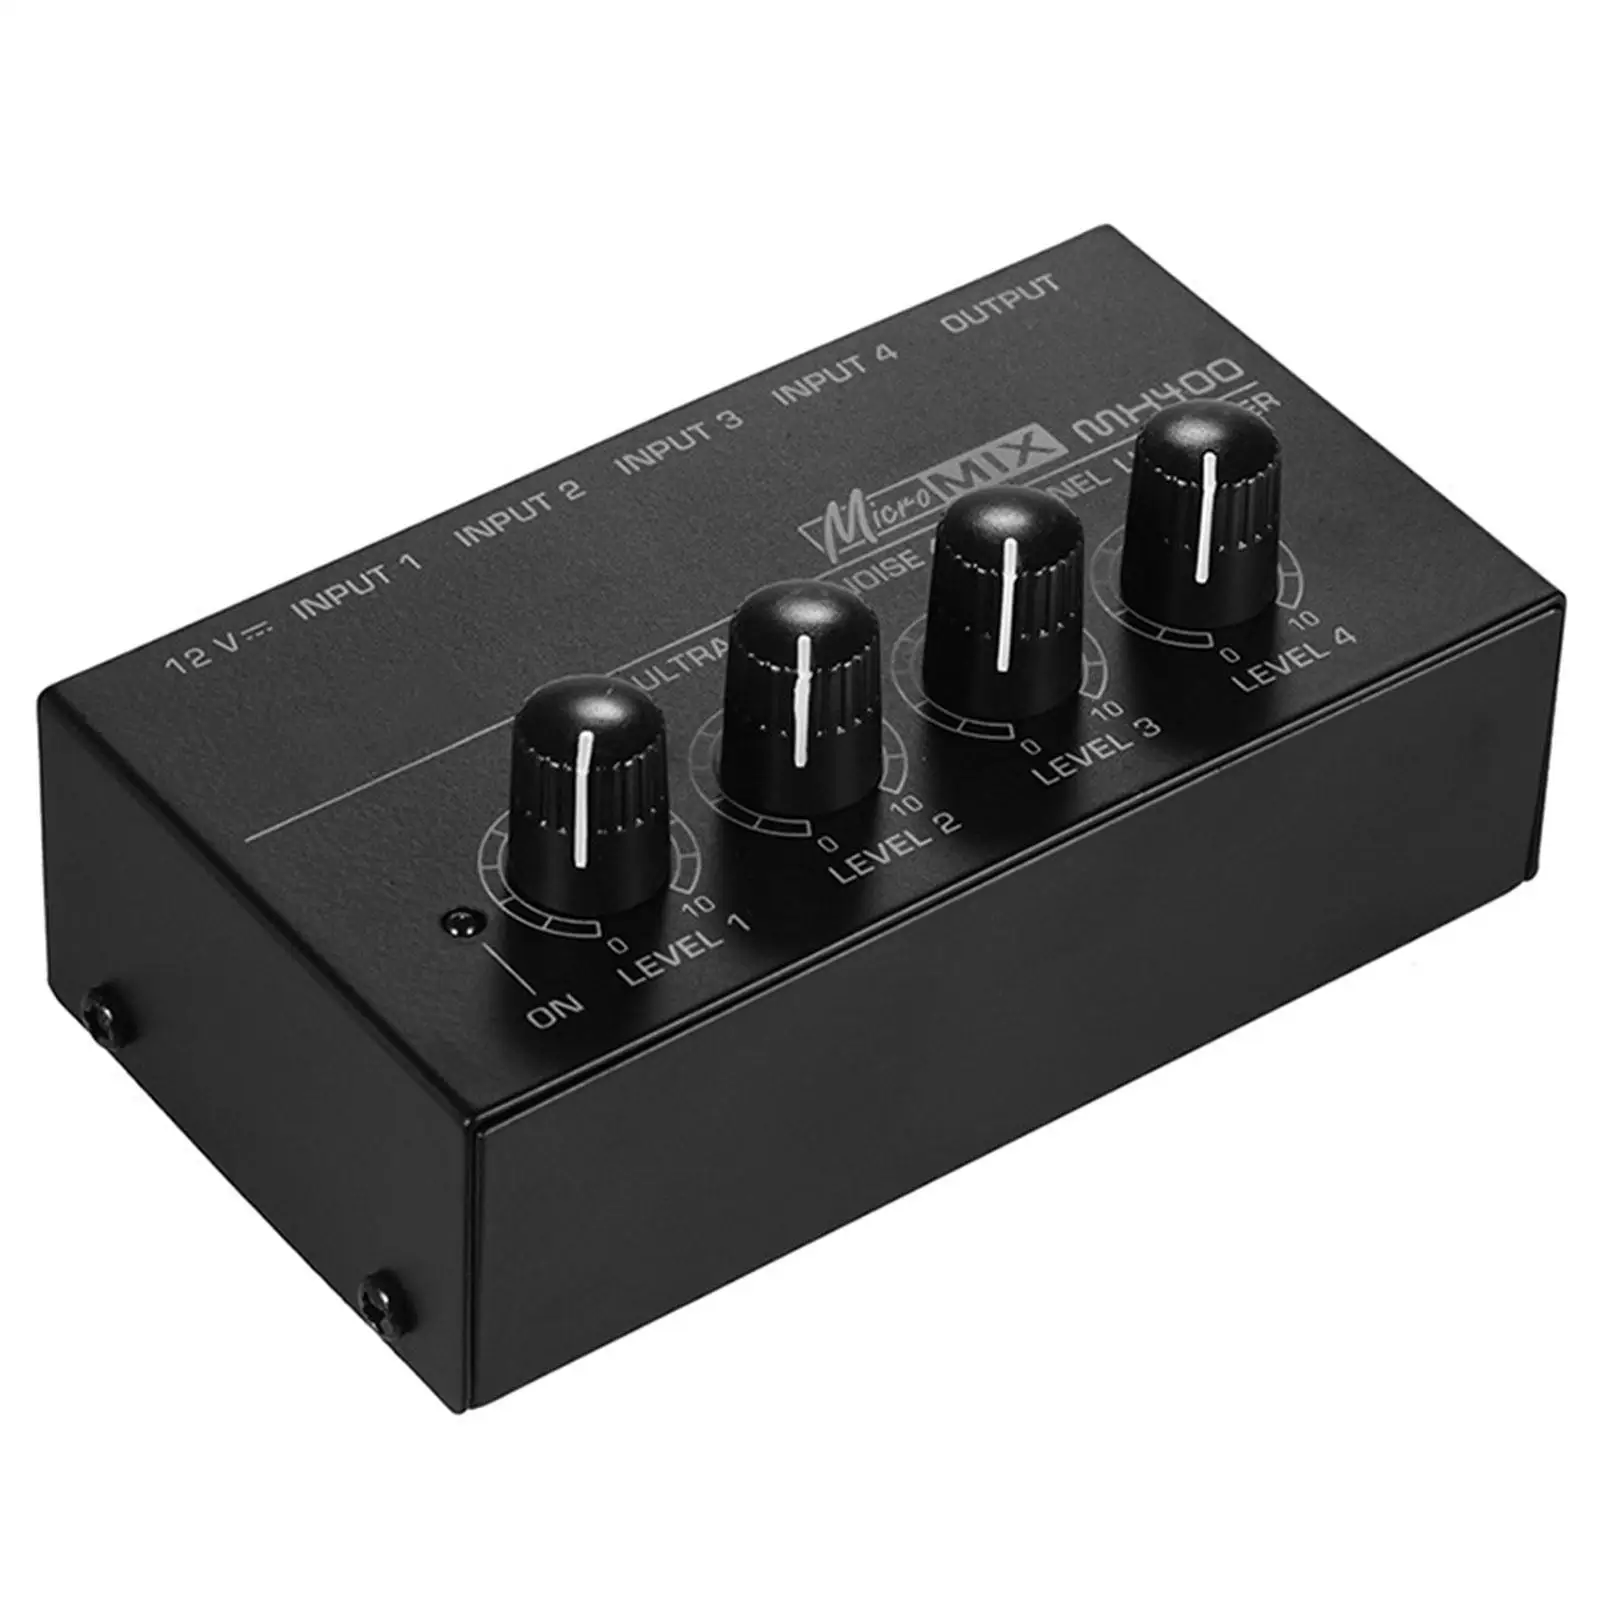 4 Channel Audio Mixer High Sound Quality Ultra Low Noise Professional Portable Mixing Console for Guitars Home Bars Bass Karaoke